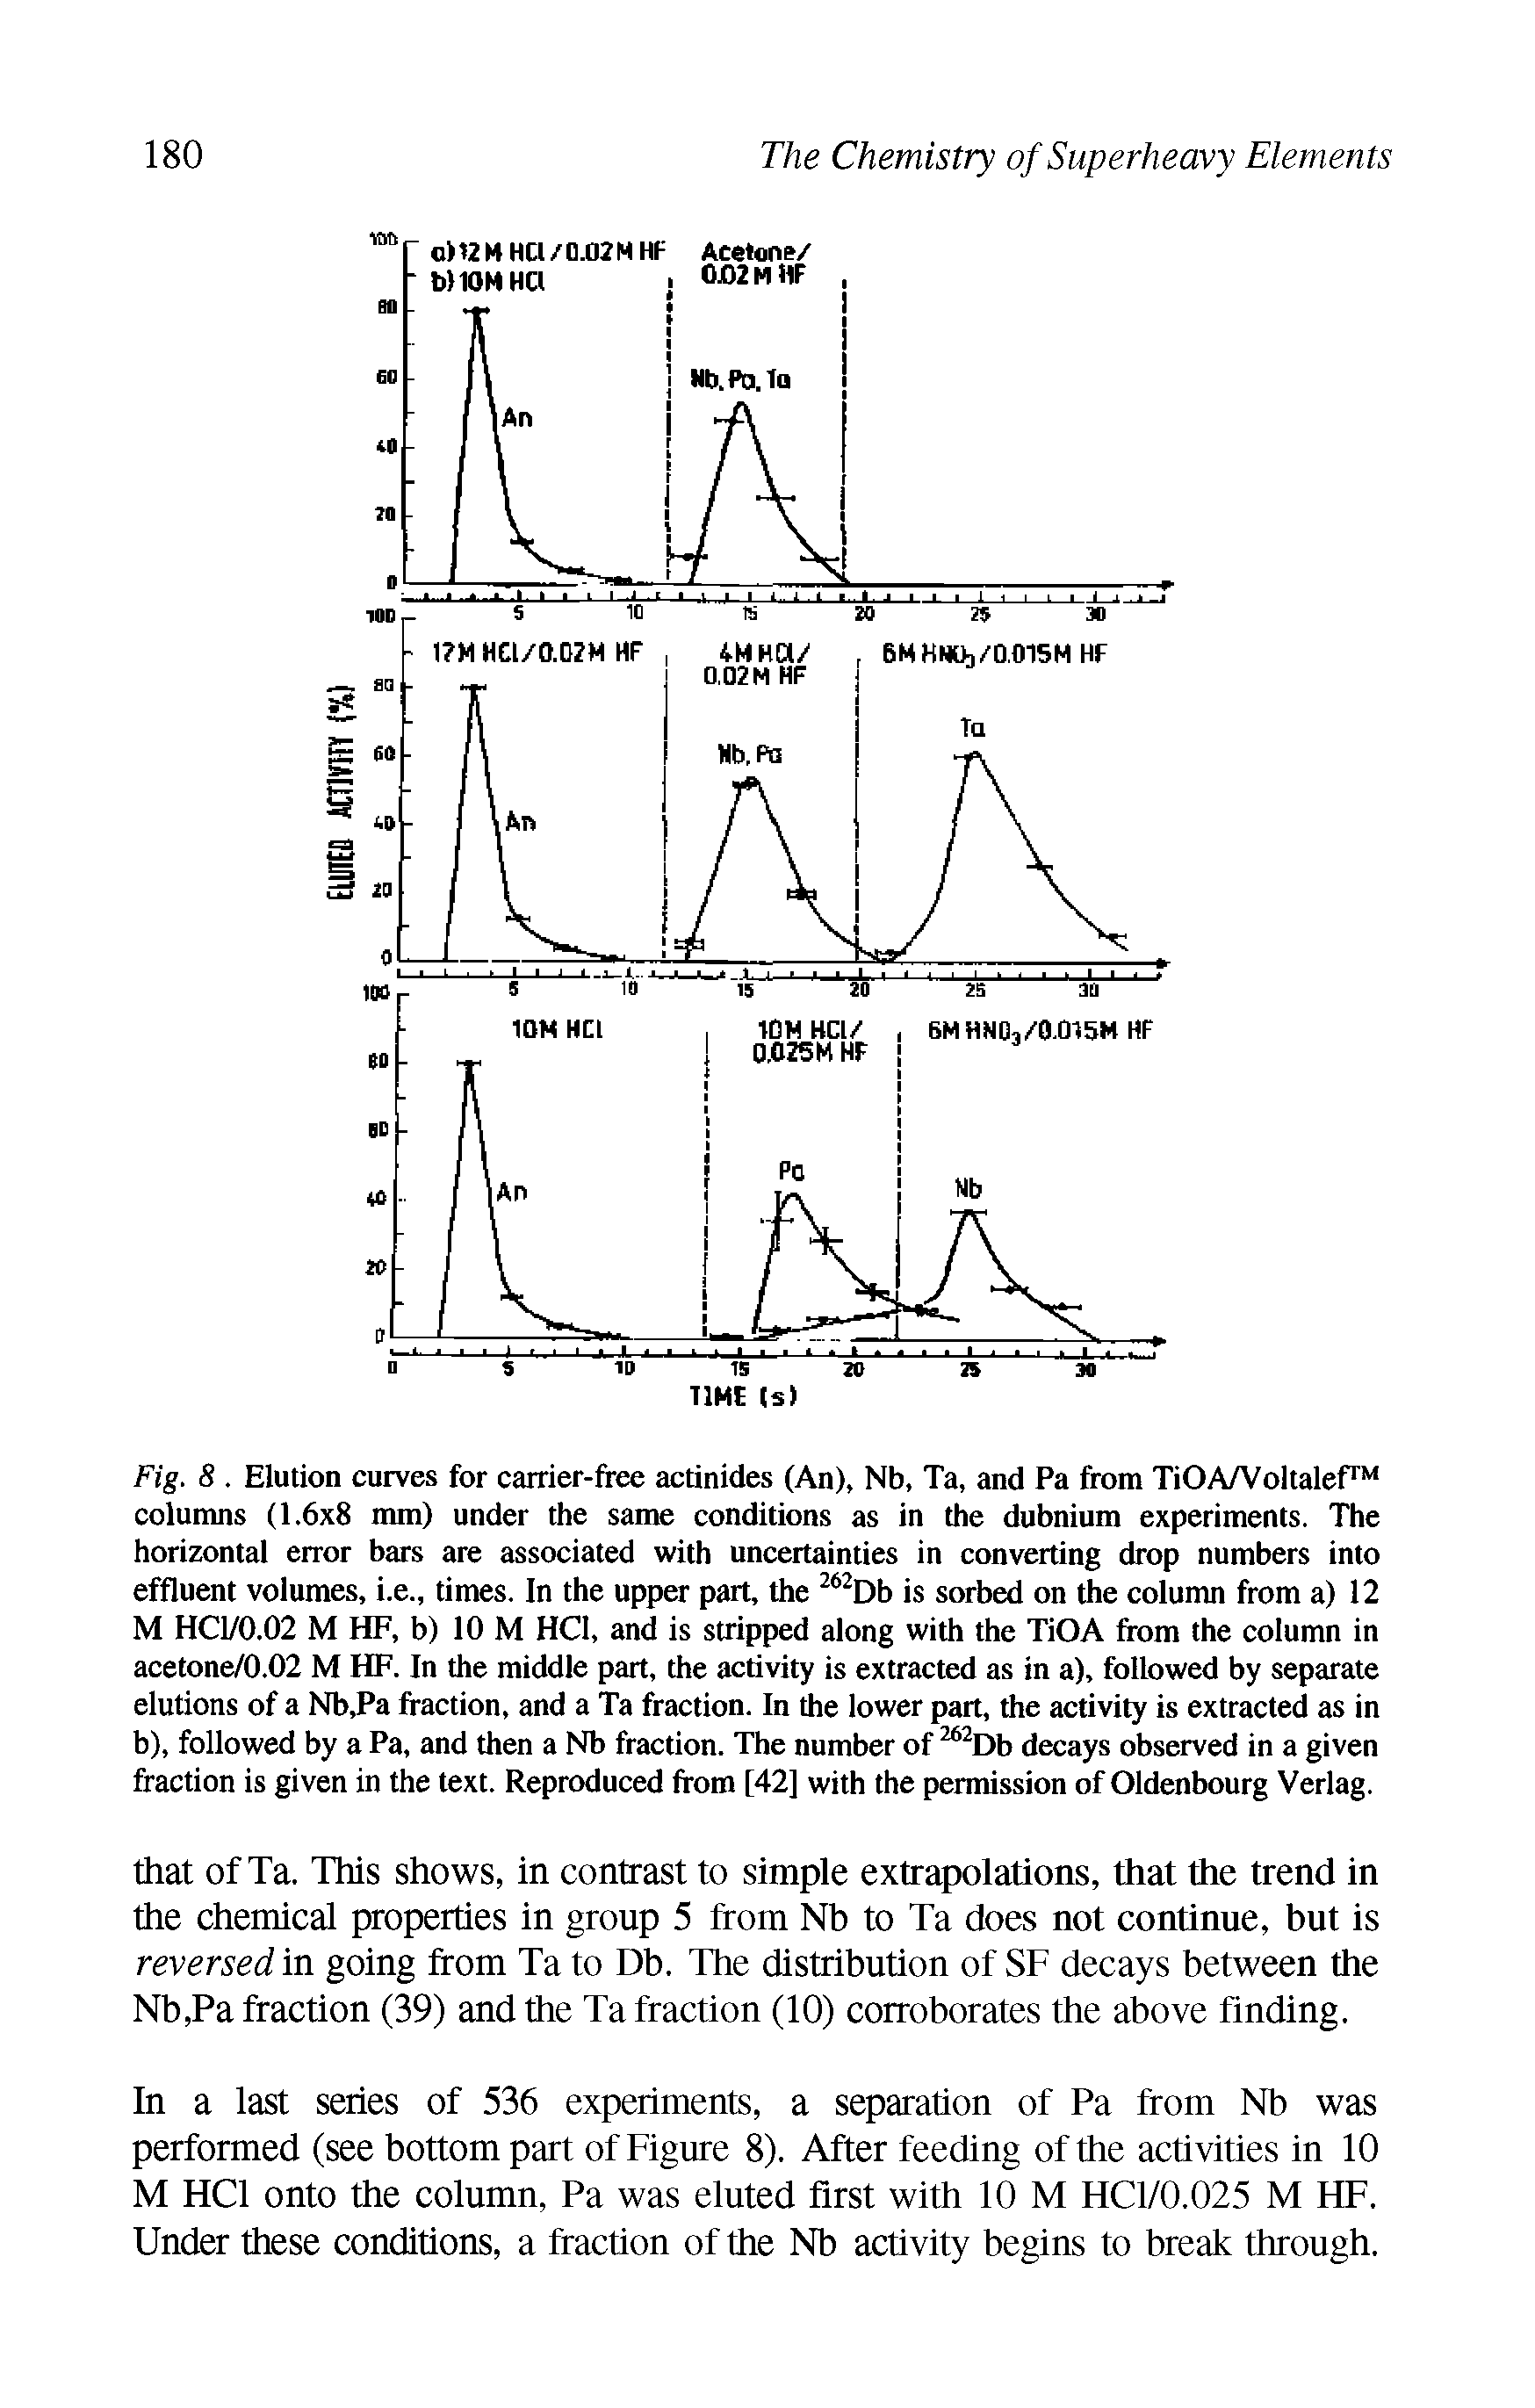 Fig. 8. Elution curves for carrier-free actinides (An), Nb, Ta, and Pa from TiOA/Voltalef columns (1.6x8 mm) under the same conditions as in the dubnium experiments. The horizontal error bars are associated with uncertainties in converting drop numbers into effluent volumes, i.e., times. In the upper part, the 262Db is sorbed on the column from a) 12 M HC1/0.02 M HF, b) 10 M HC1, and is stripped along with the TiOA from the column in acetone/0.02 M HF. In the middle part, the activity is extracted as in a), followed by separate elutions of a Nb,Pa fraction, and a Ta fraction. In the lower part, the activity is extracted as in b), followed by a Pa, and then a Nb fraction. The number of 262Db decays observed in a given fraction is given in the text. Reproduced from [42] with the permission of Oldenbourg Verlag.